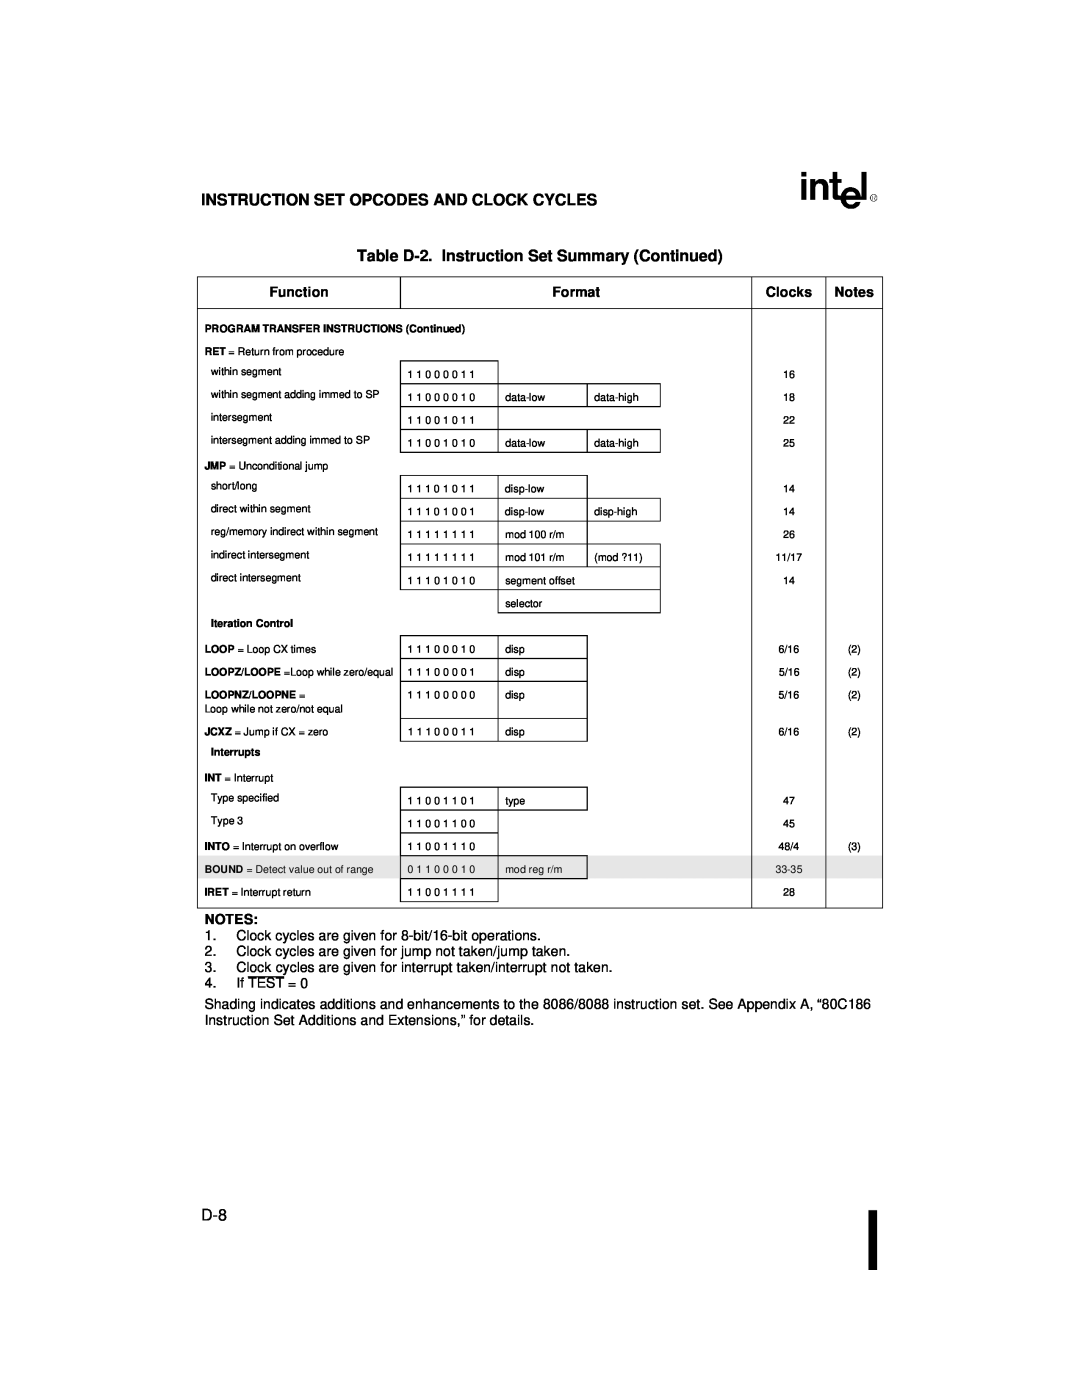 Intel 80C186XL Instruction Set Opcodes And Clock Cycles, Table D-2.Instruction Set Summary Continued, Iteration Control 